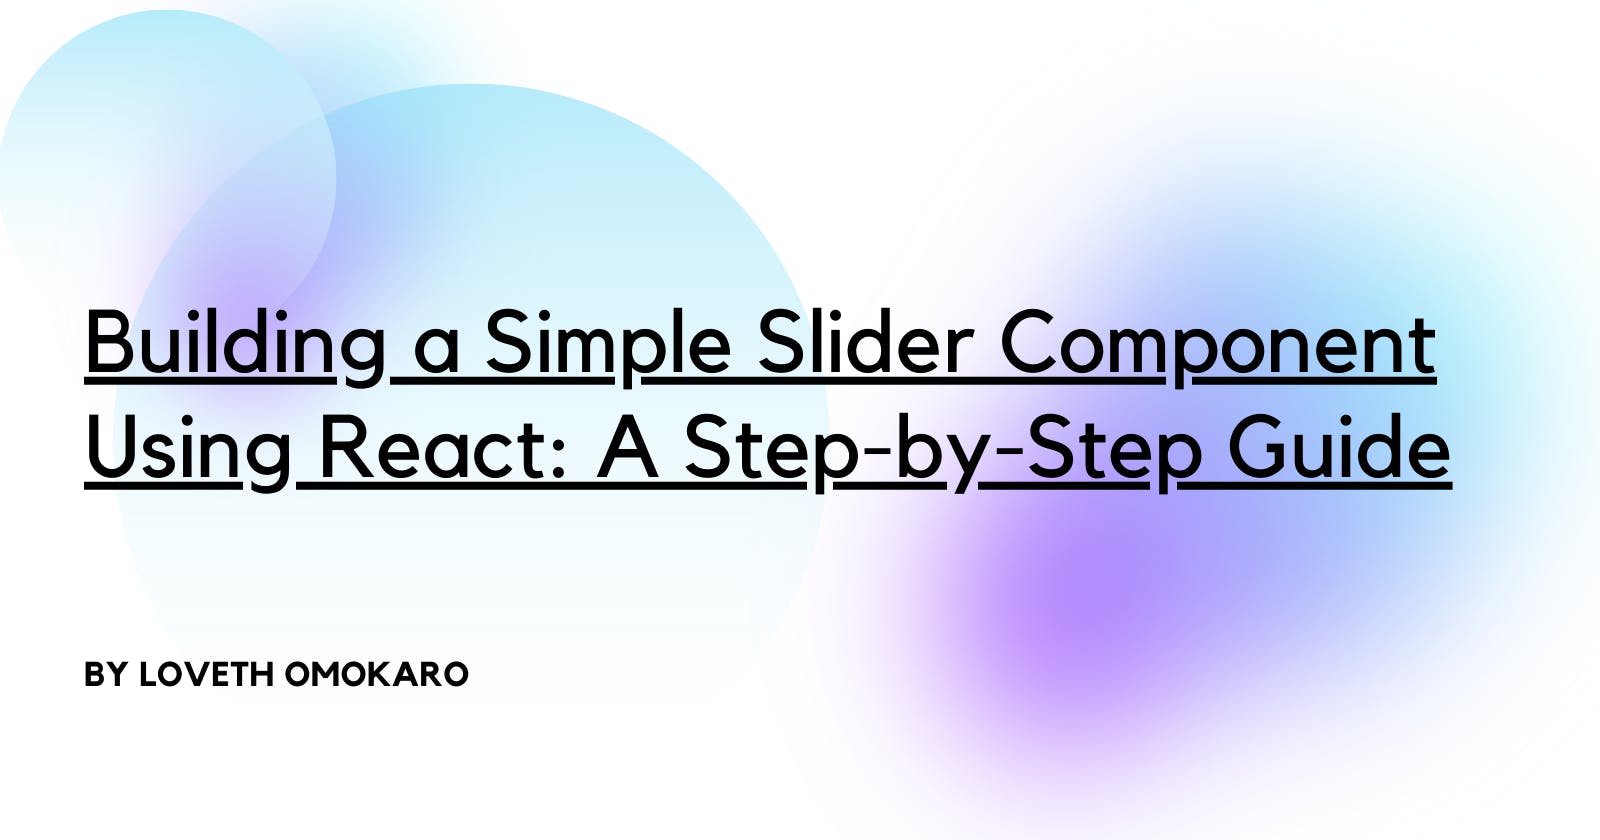 Building a Simple Slider Component Using React: A Step-by-Step Guide